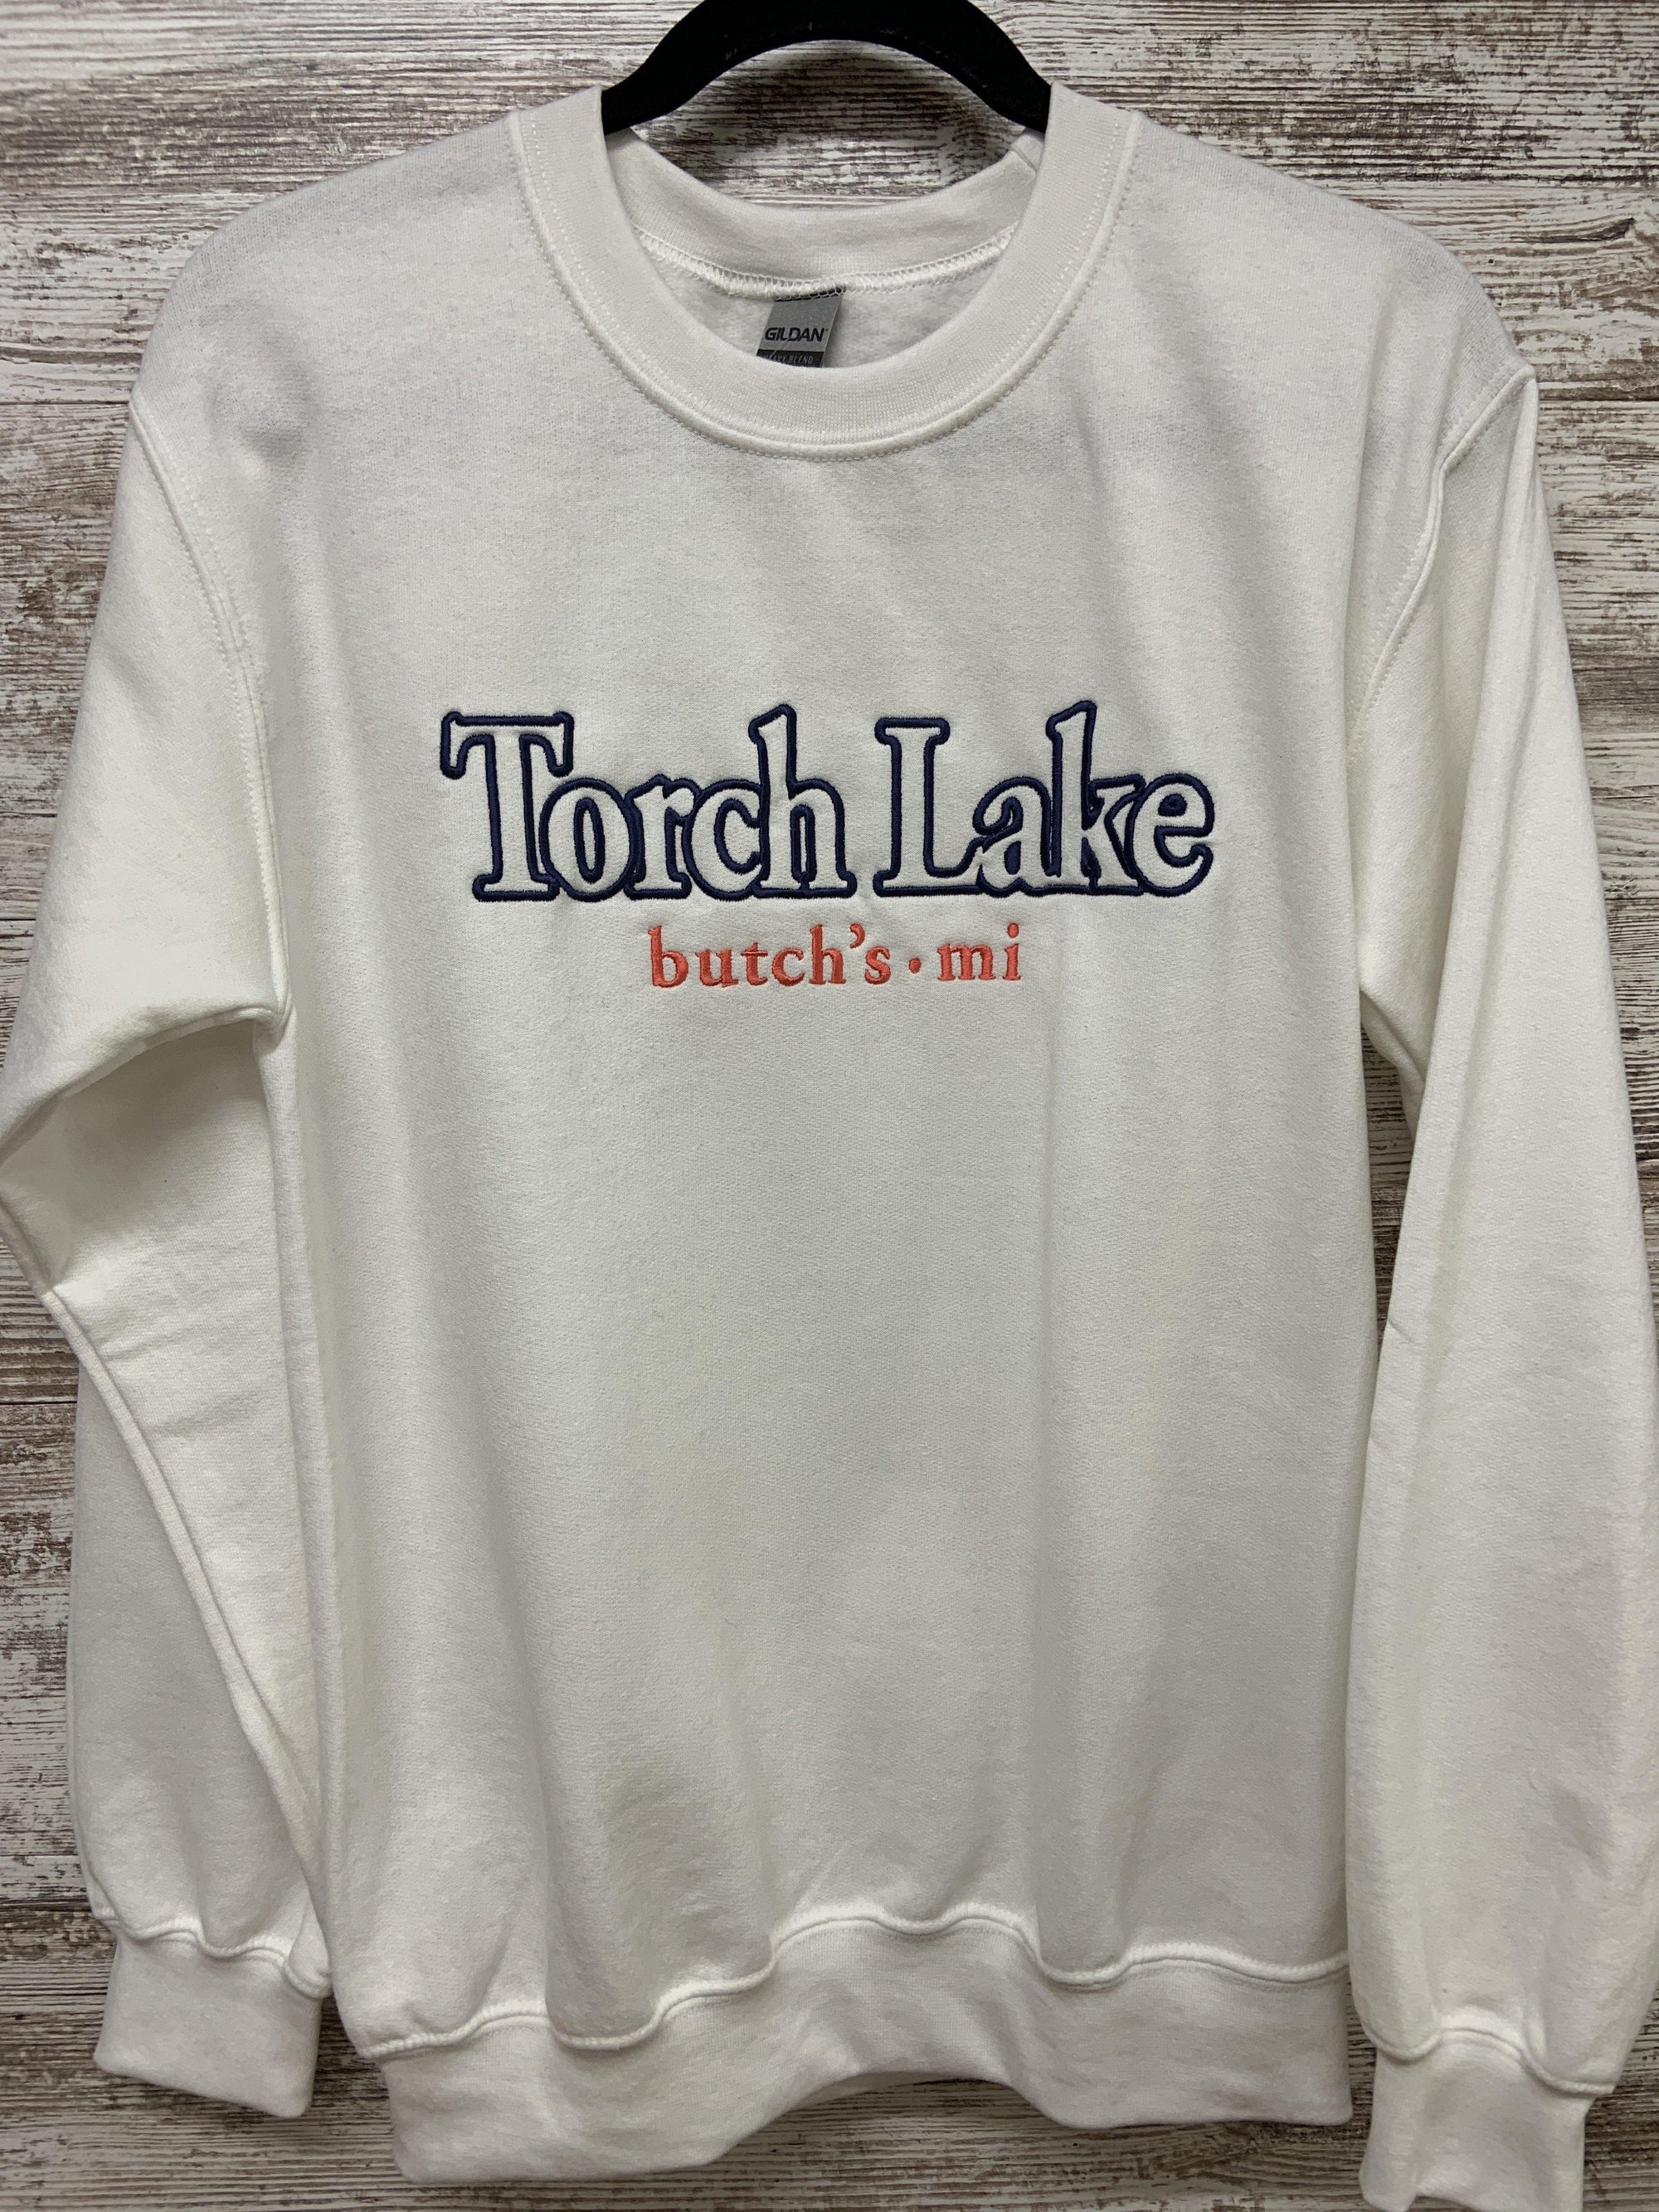 Red White & Blue Crew - Butch's Tackle & Marine - Pontoon Rentals on Torch Lake